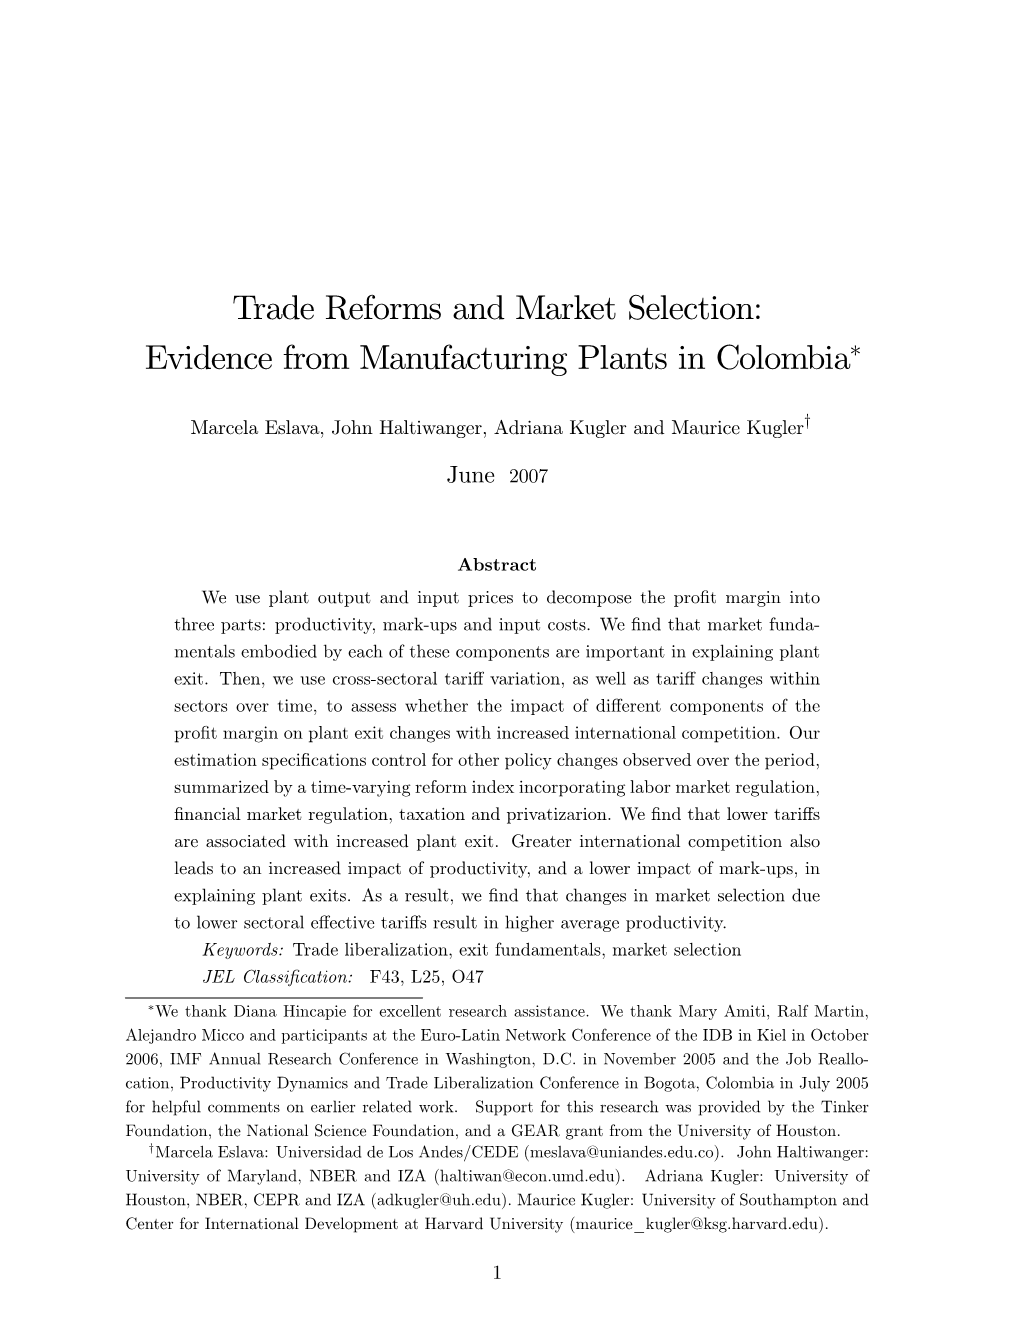 Trade Reforms and Market Selection: Evidence from Manufacturing